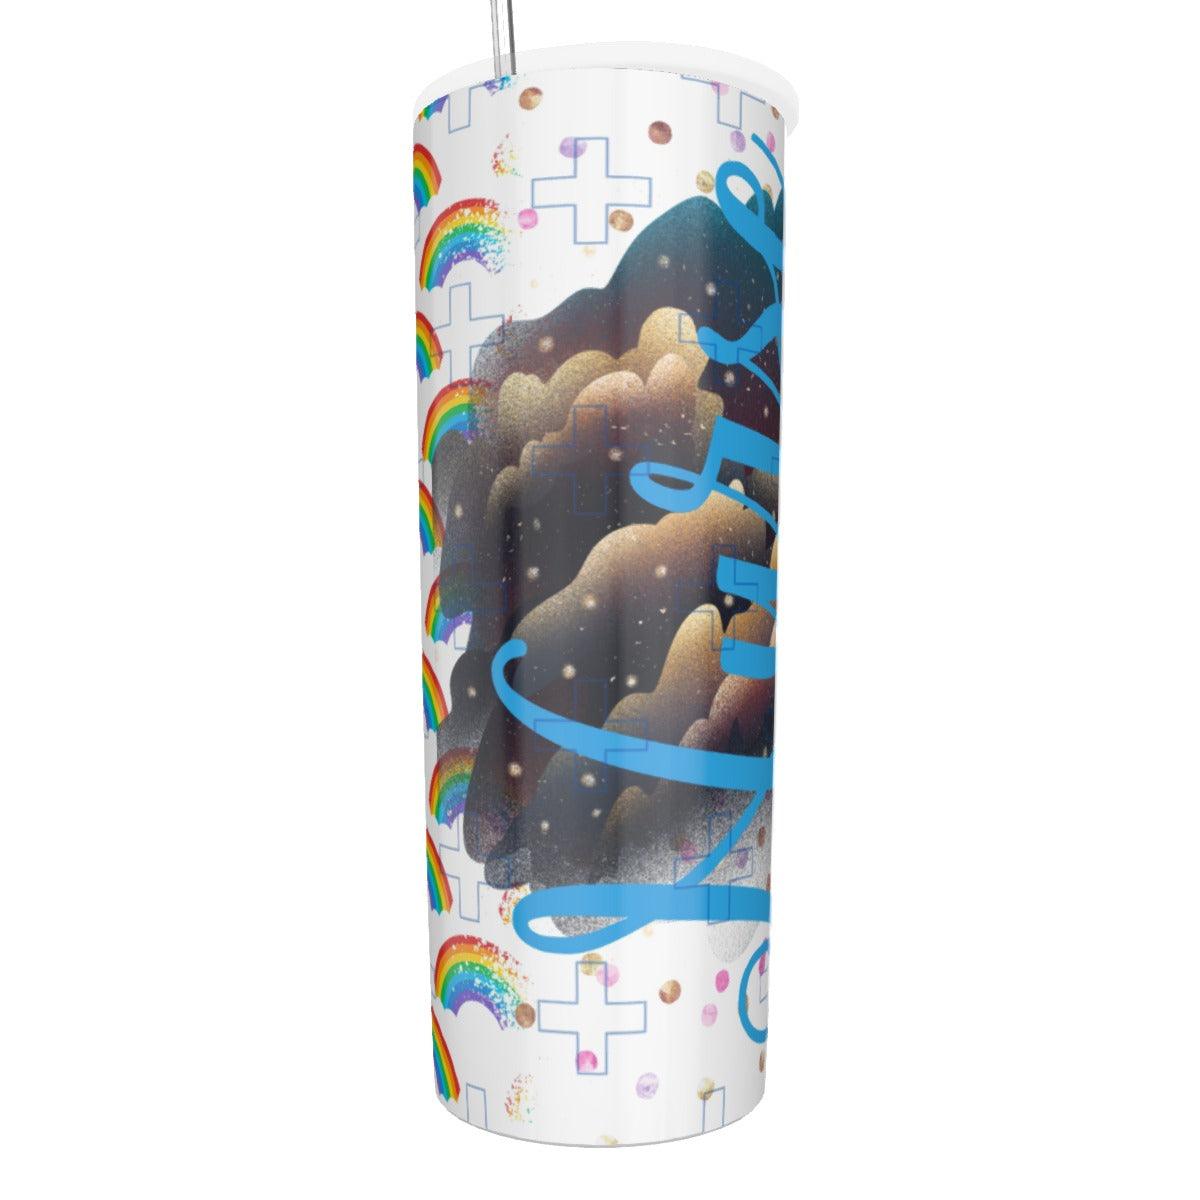 Nurse Rainbow and Clouds tumbler personalized gift for doctor nurse appreciation gift for RN personalized tumbler gift grad medic insulated coffee travel cup - Thumbedtreats